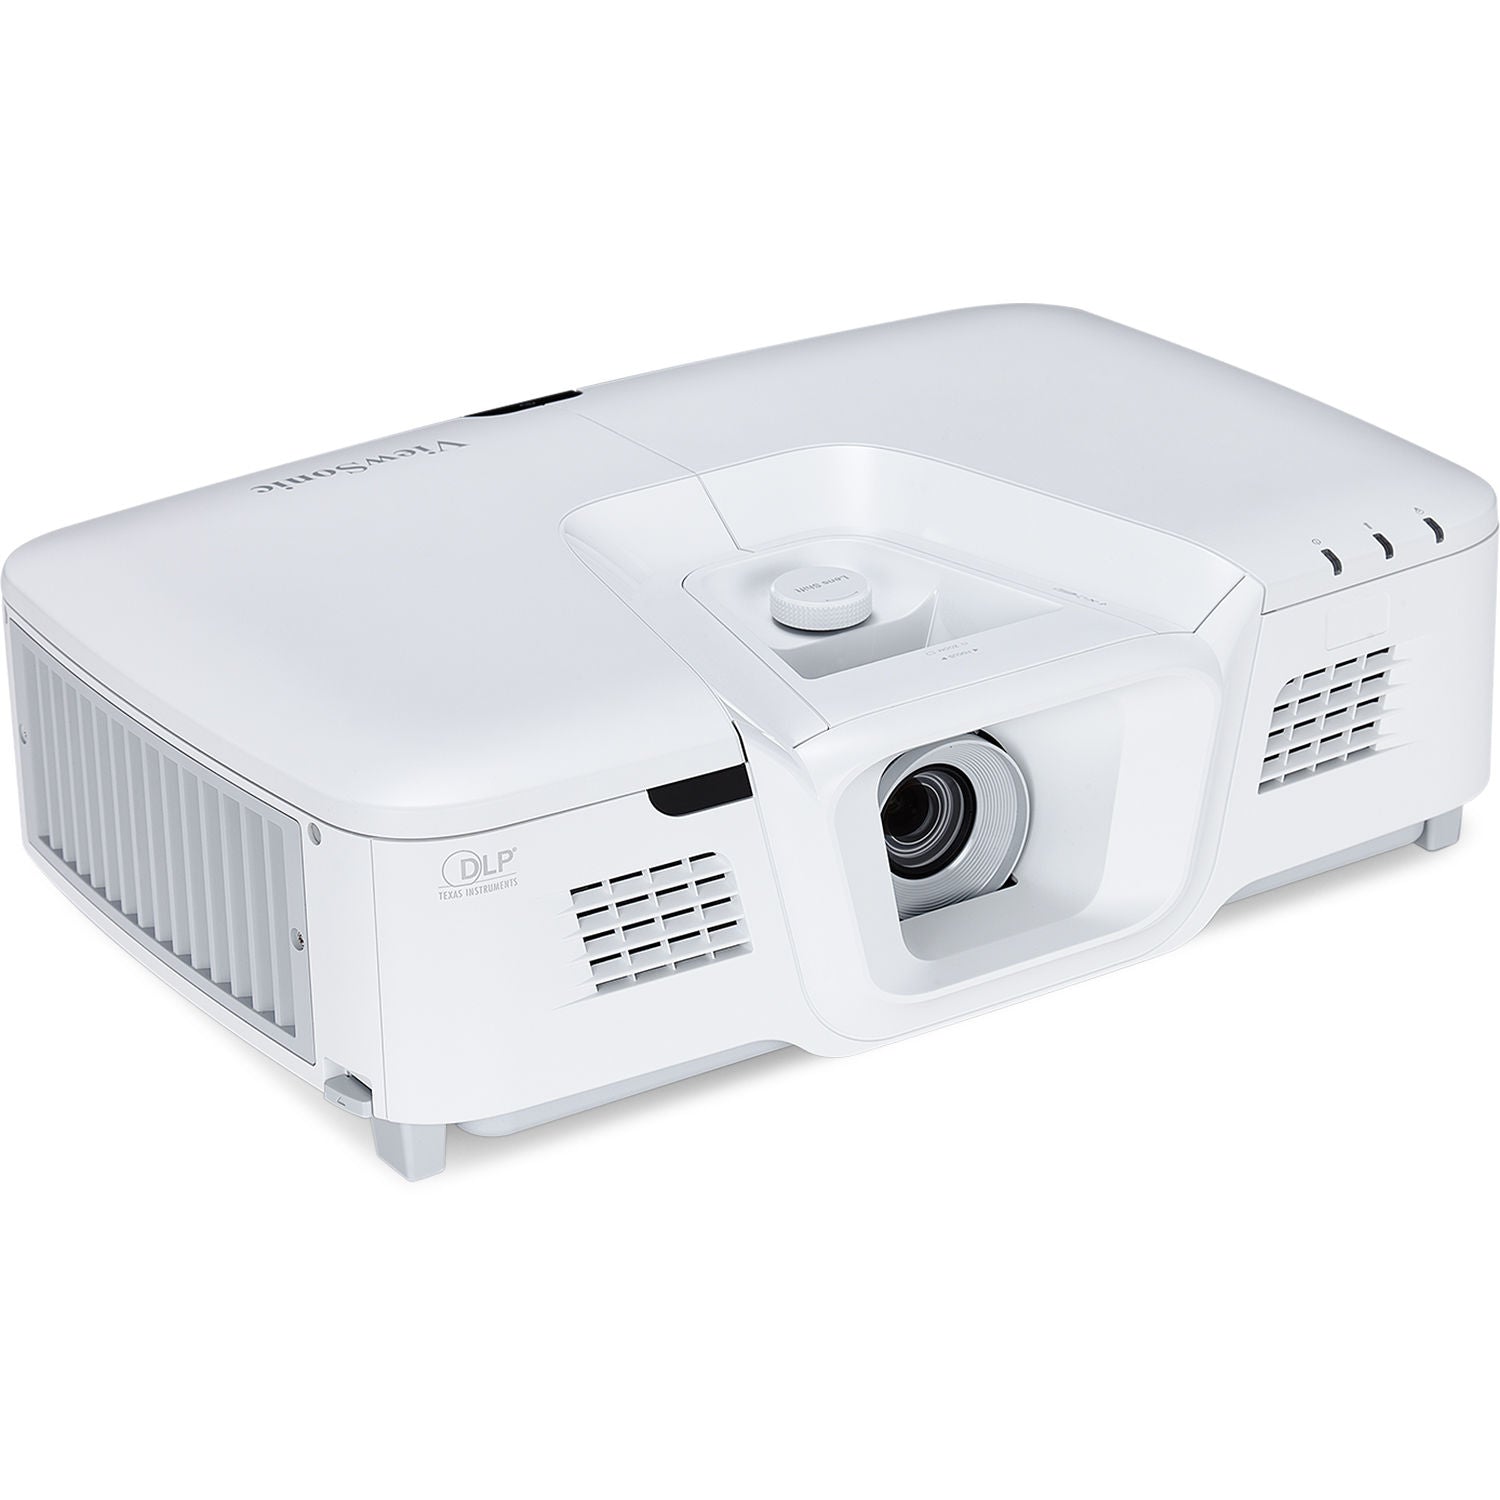 ViewSonic PG800HD-S 5000 Lumens WXGA HDMI Networkable Projector with Lens Shift - Certified Refurbished